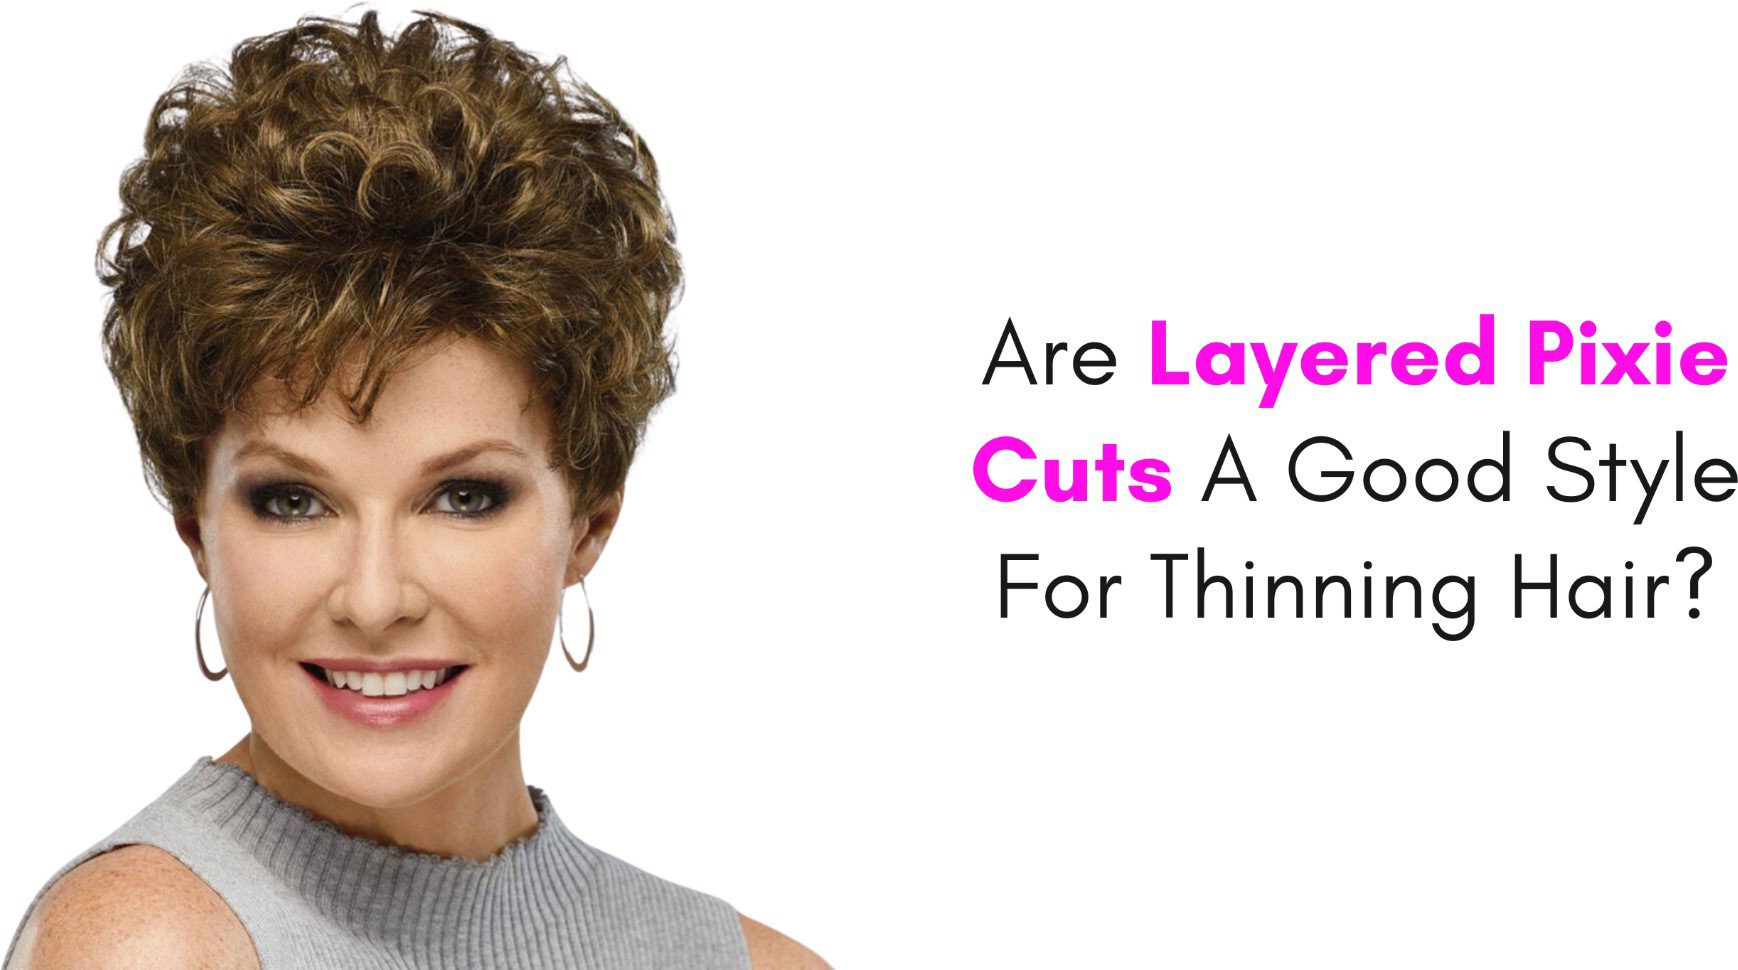 are layered pixie cuts a good style for thinning hair